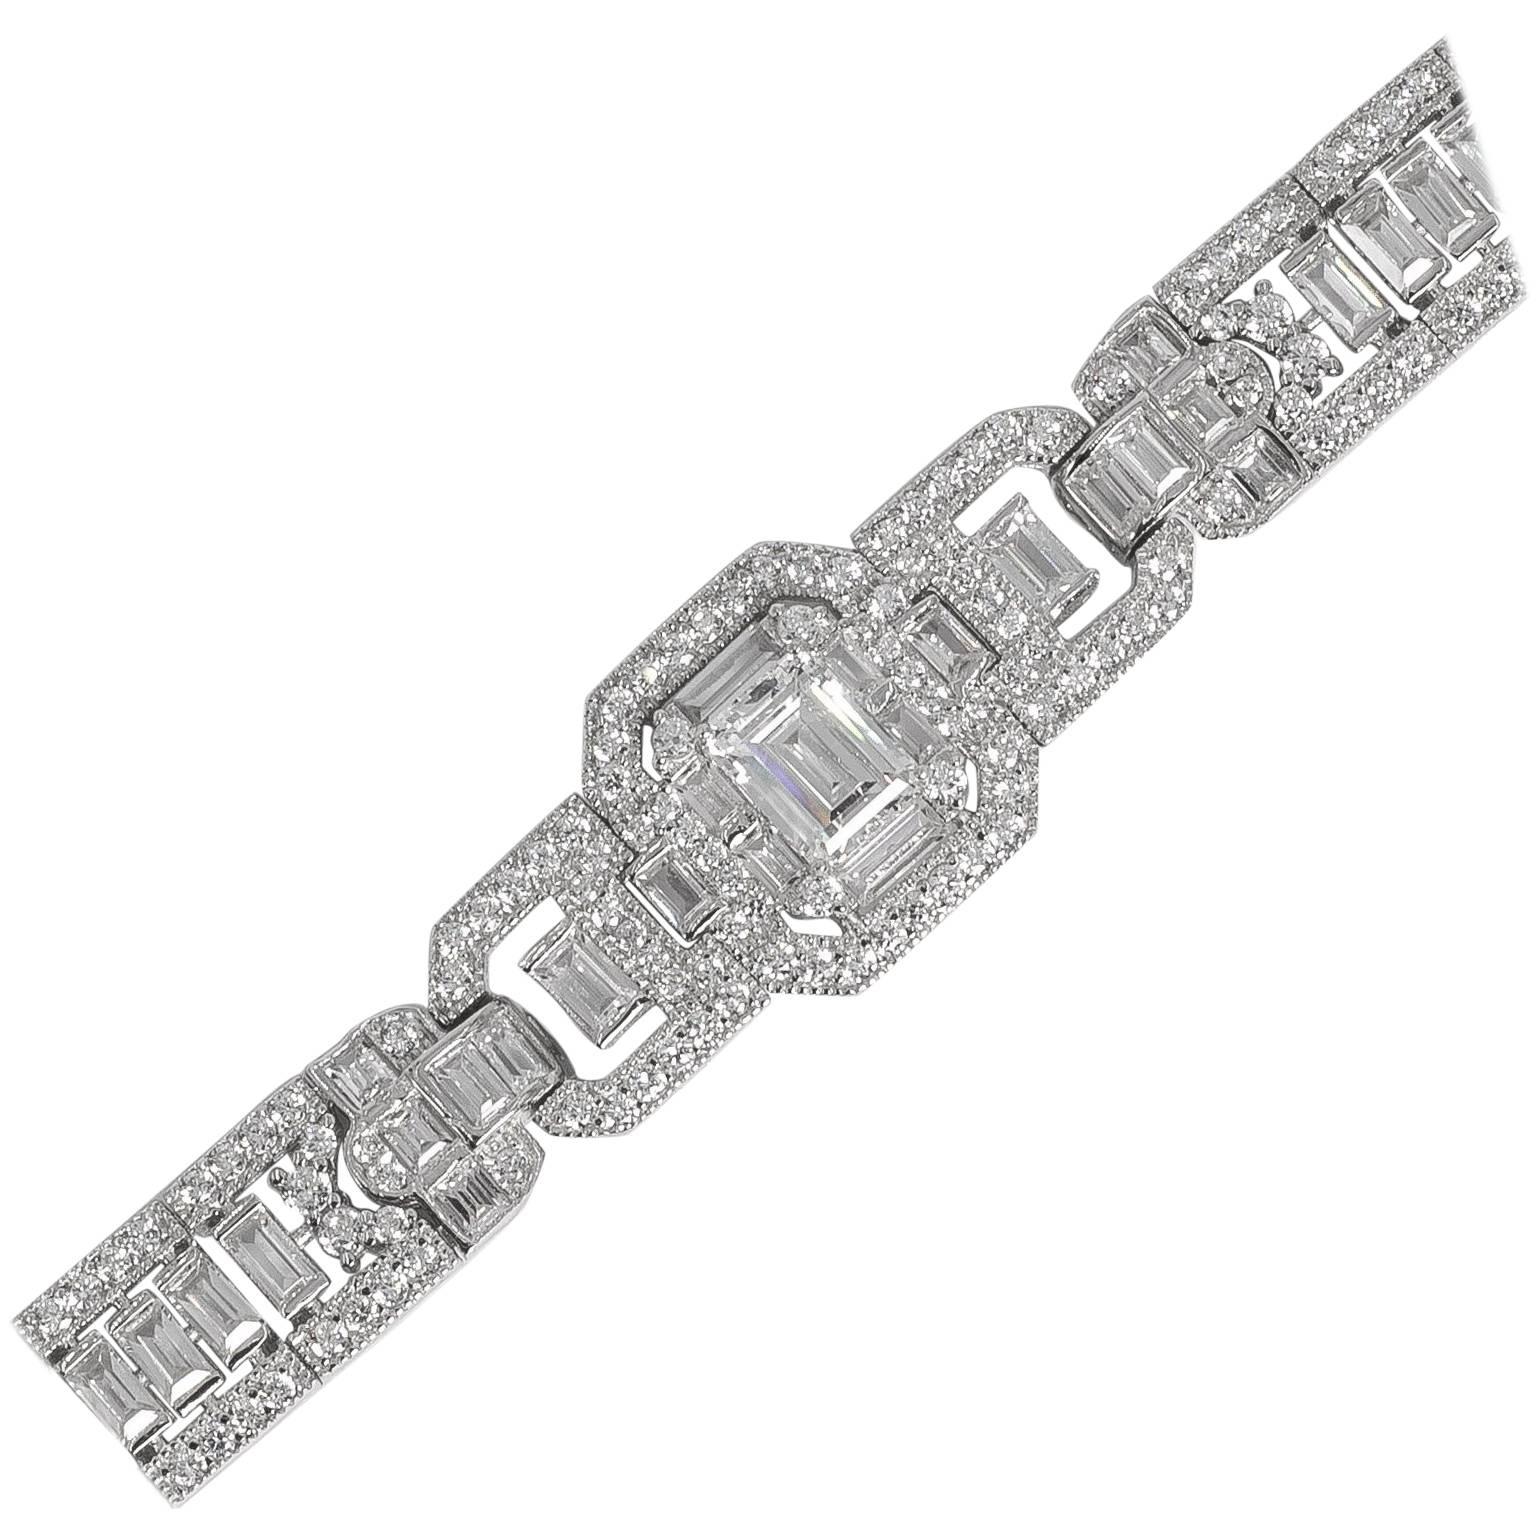 Art Deco style diamond  costume jewelry bracelet hand made and hand cut cubic zirconia hand set in non tarnish rhodium sterling silver. Baguettes running through the center edged with round stones all flexible center set art deco motif with 3 carat